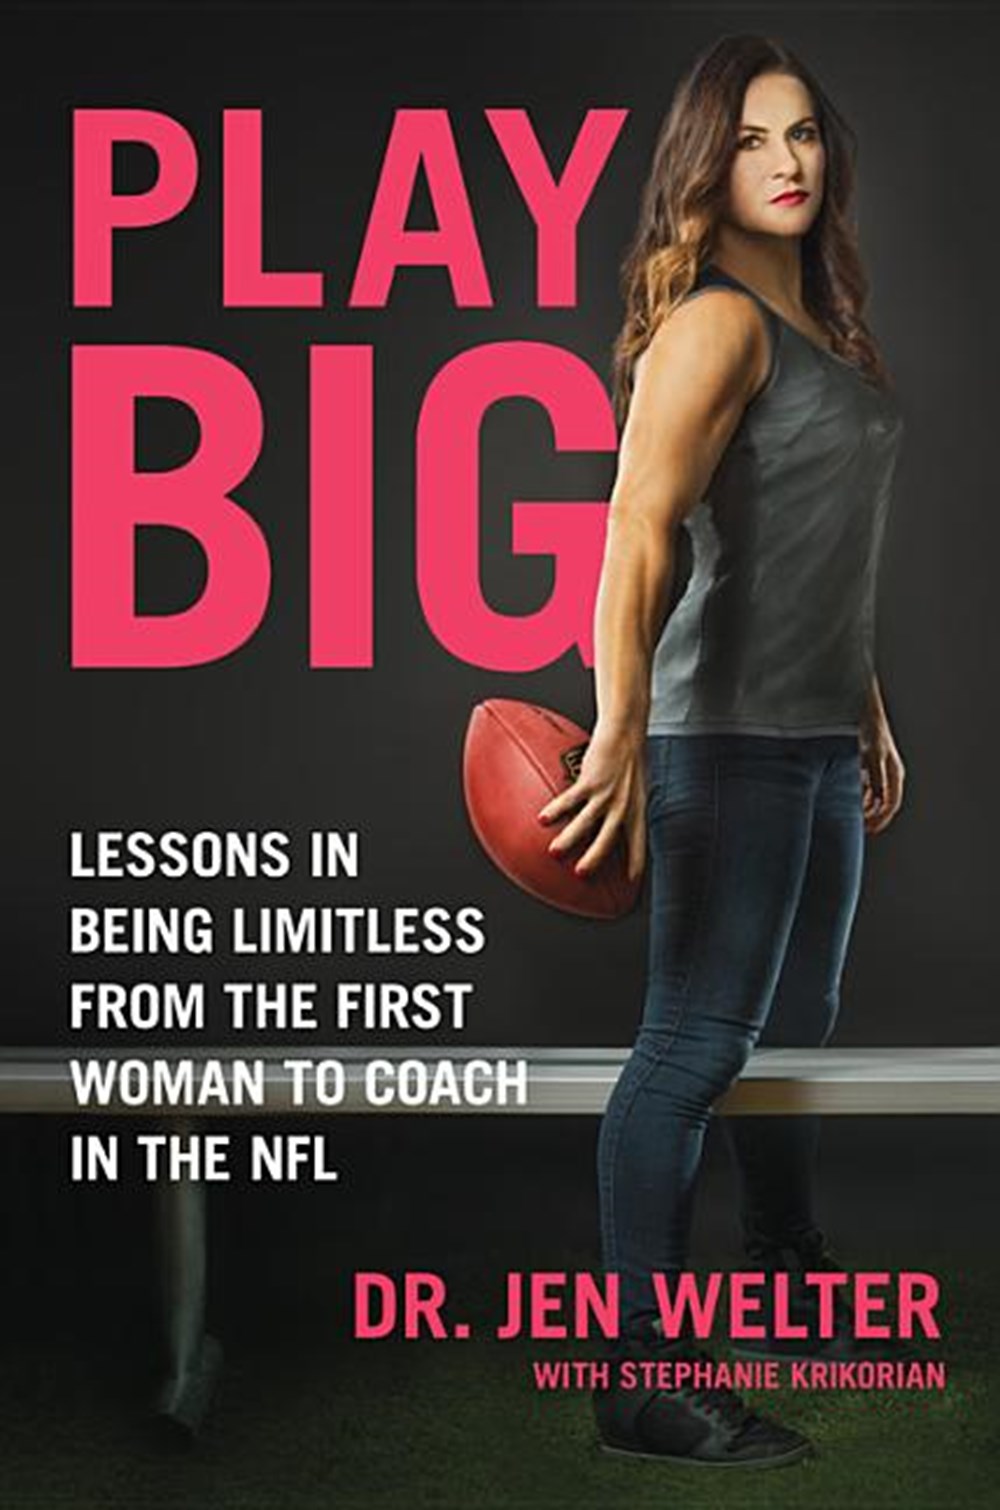 Play Big Lessons in Being Limitless from the First Woman to Coach in the NFL